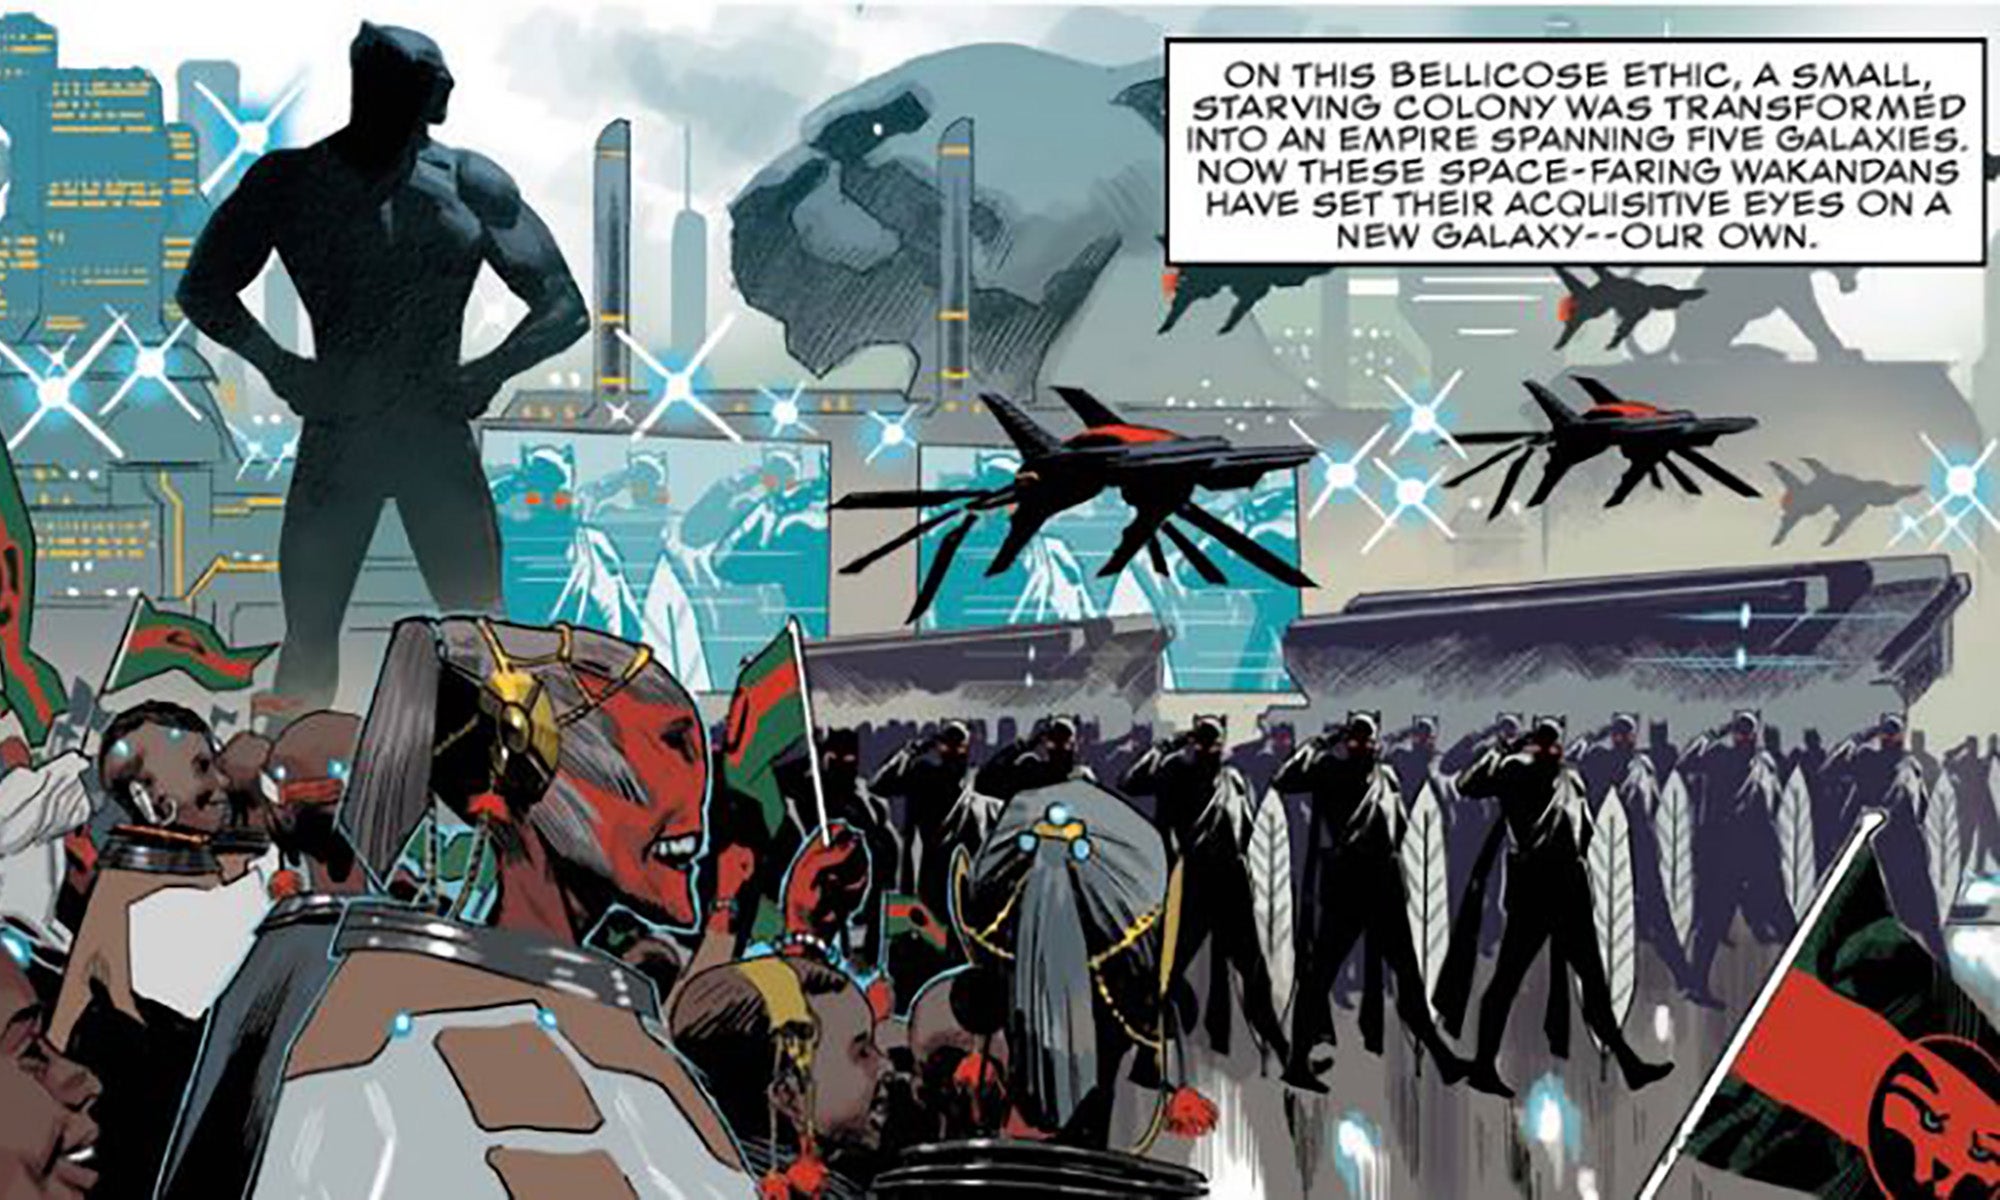 An alien army marches through a metropolis with giant panther statues erect.